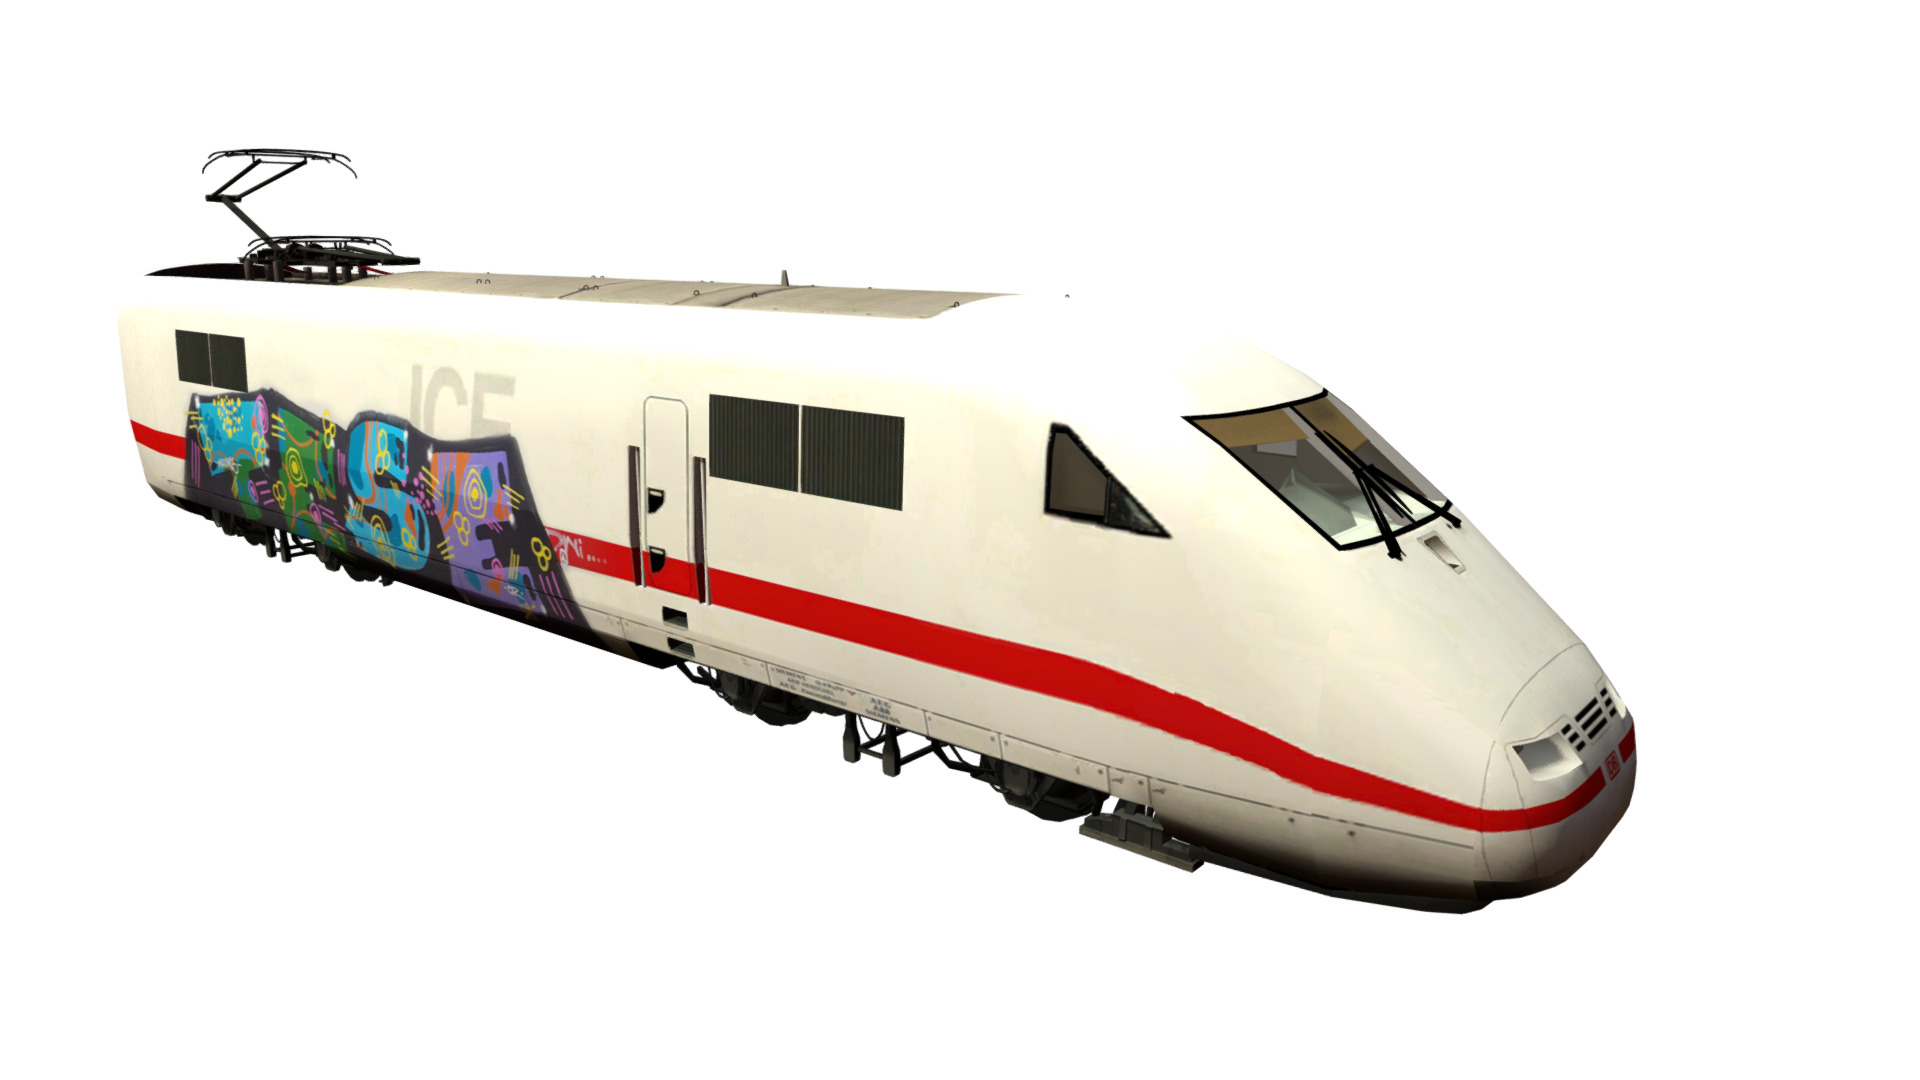 3D model DB ICE 1 – Triebkopf – Grafitti - This is a 3D model of the DB ICE 1 - Triebkopf - Grafitti. The 3D model is about a white and red train.